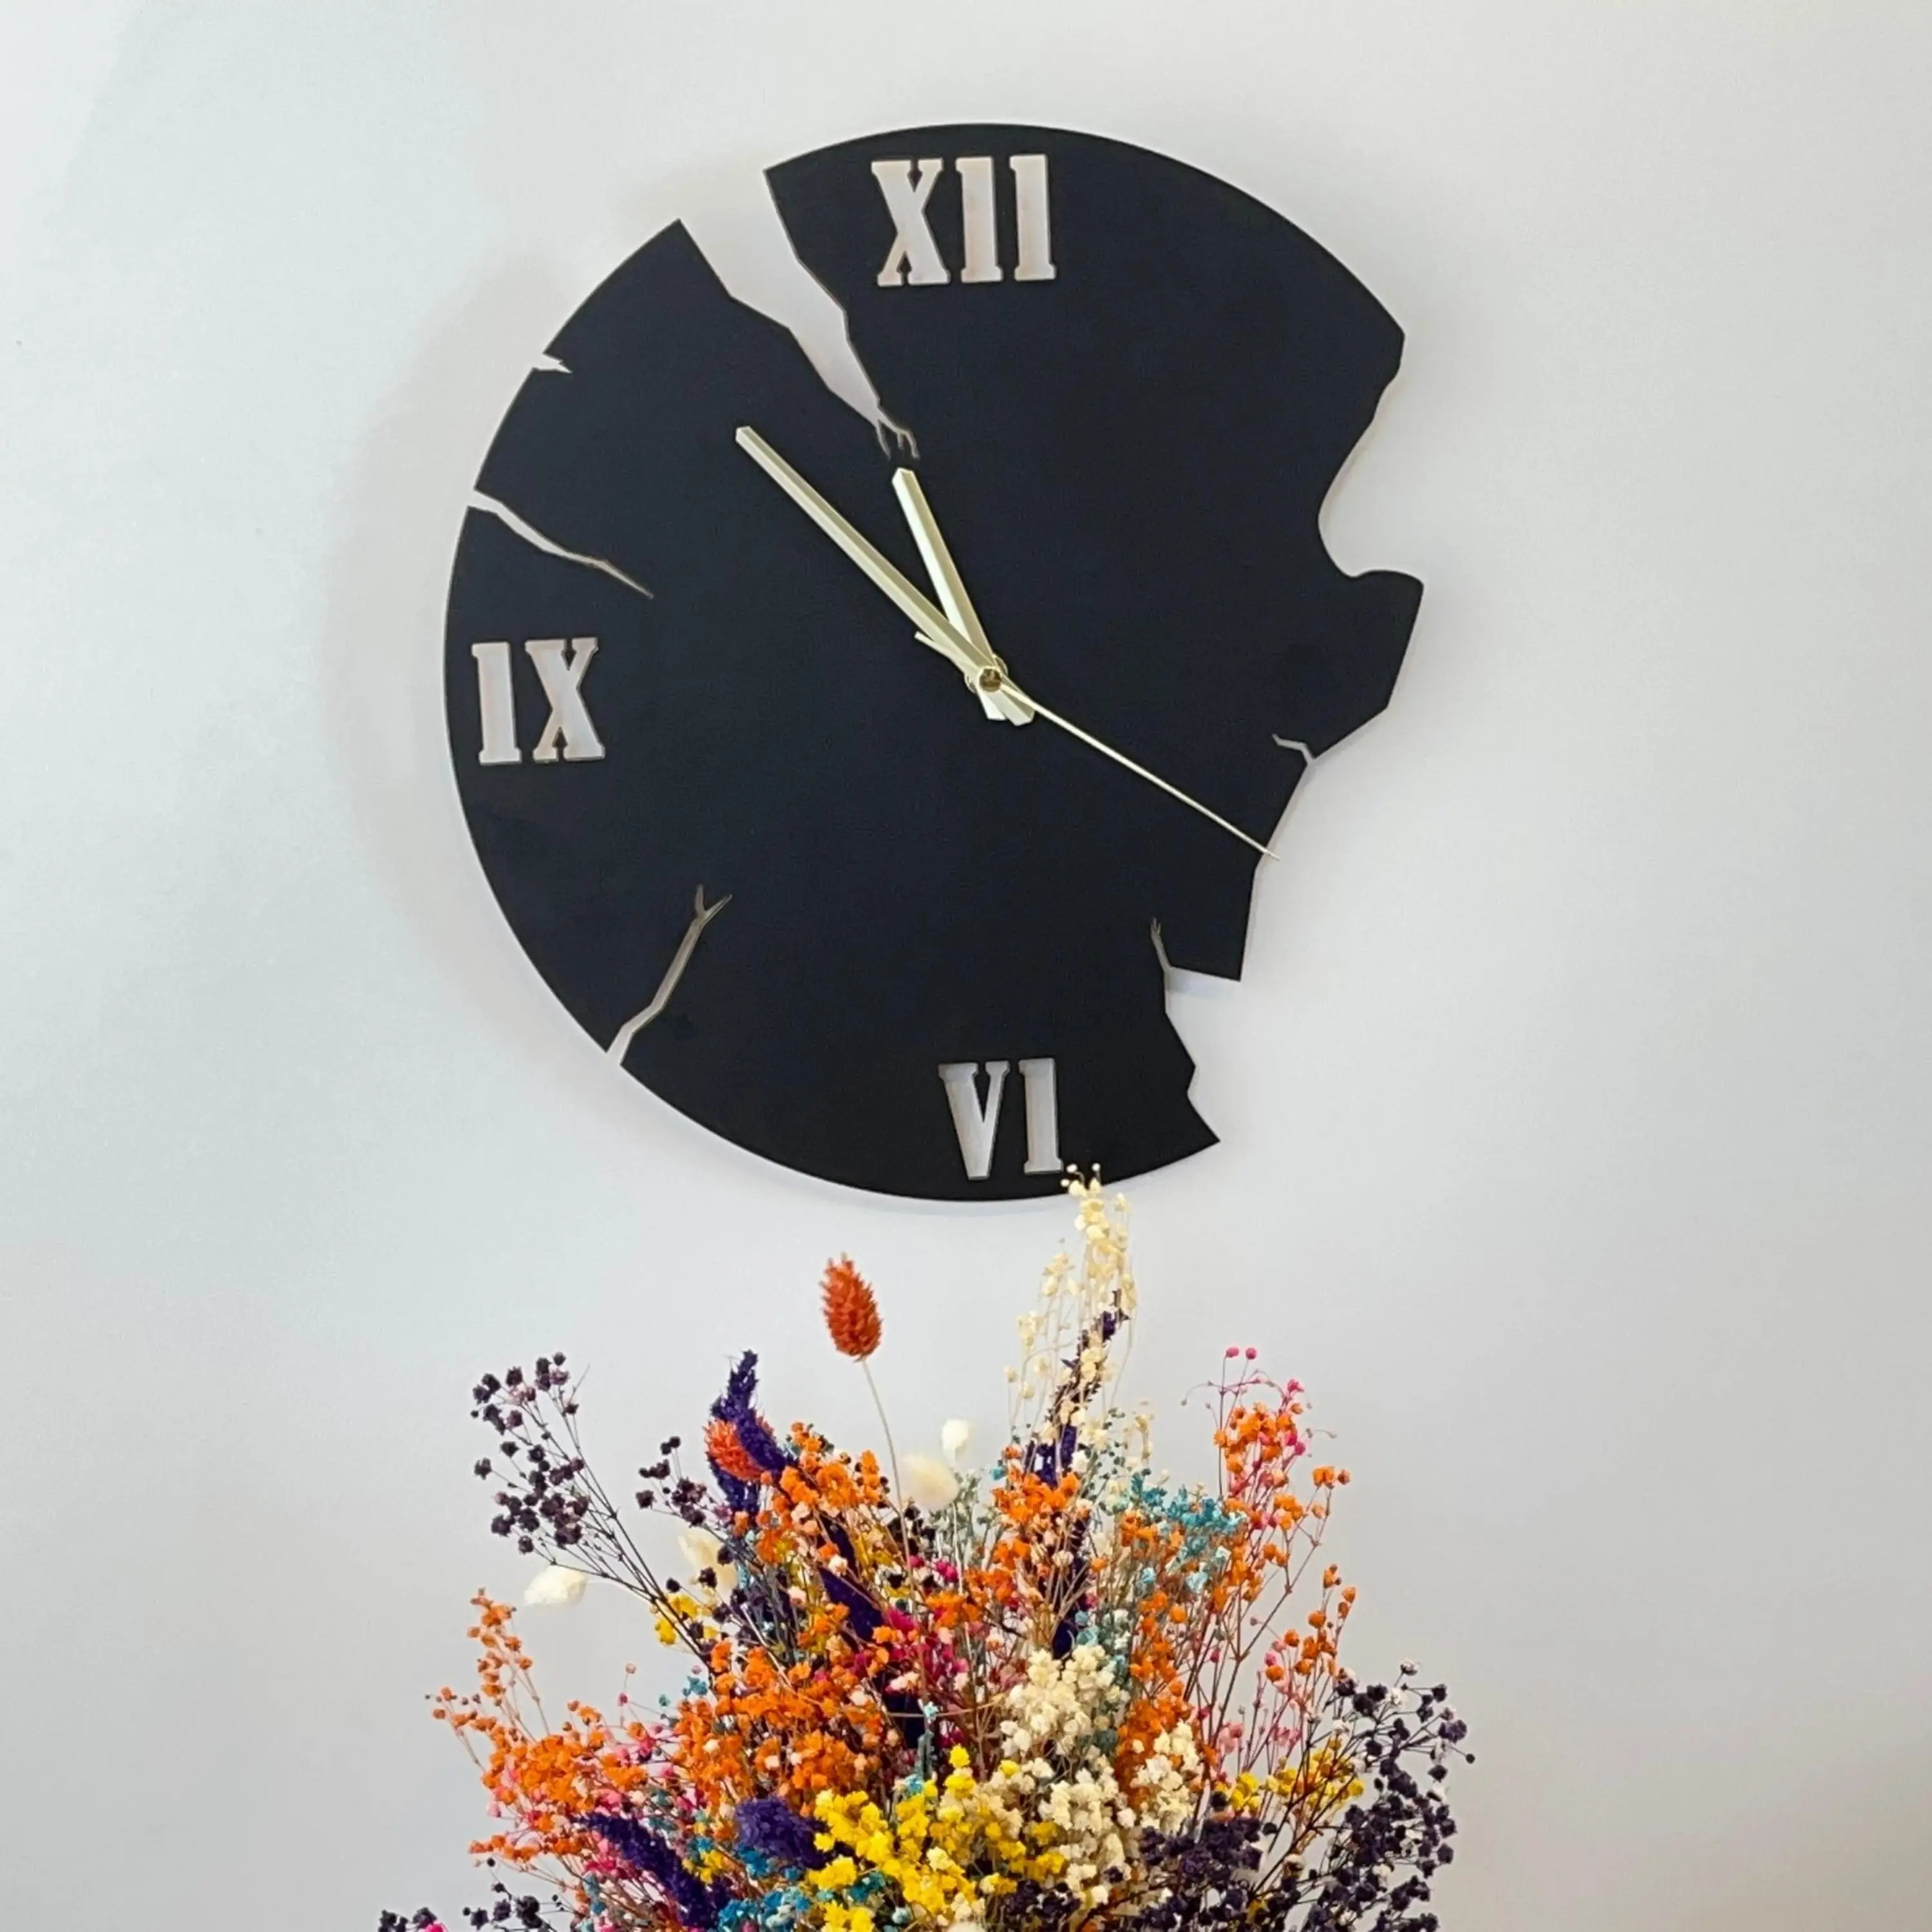 

Wooden Wall Clock Decorative Lost Time Silent Mechanism Home Office Living Room Bedroom Kitchen Quality Gift Ideas Watch Modern Art Design Style Clock Timer New Creative Stylish Adornment Classic Beautiful Nordic